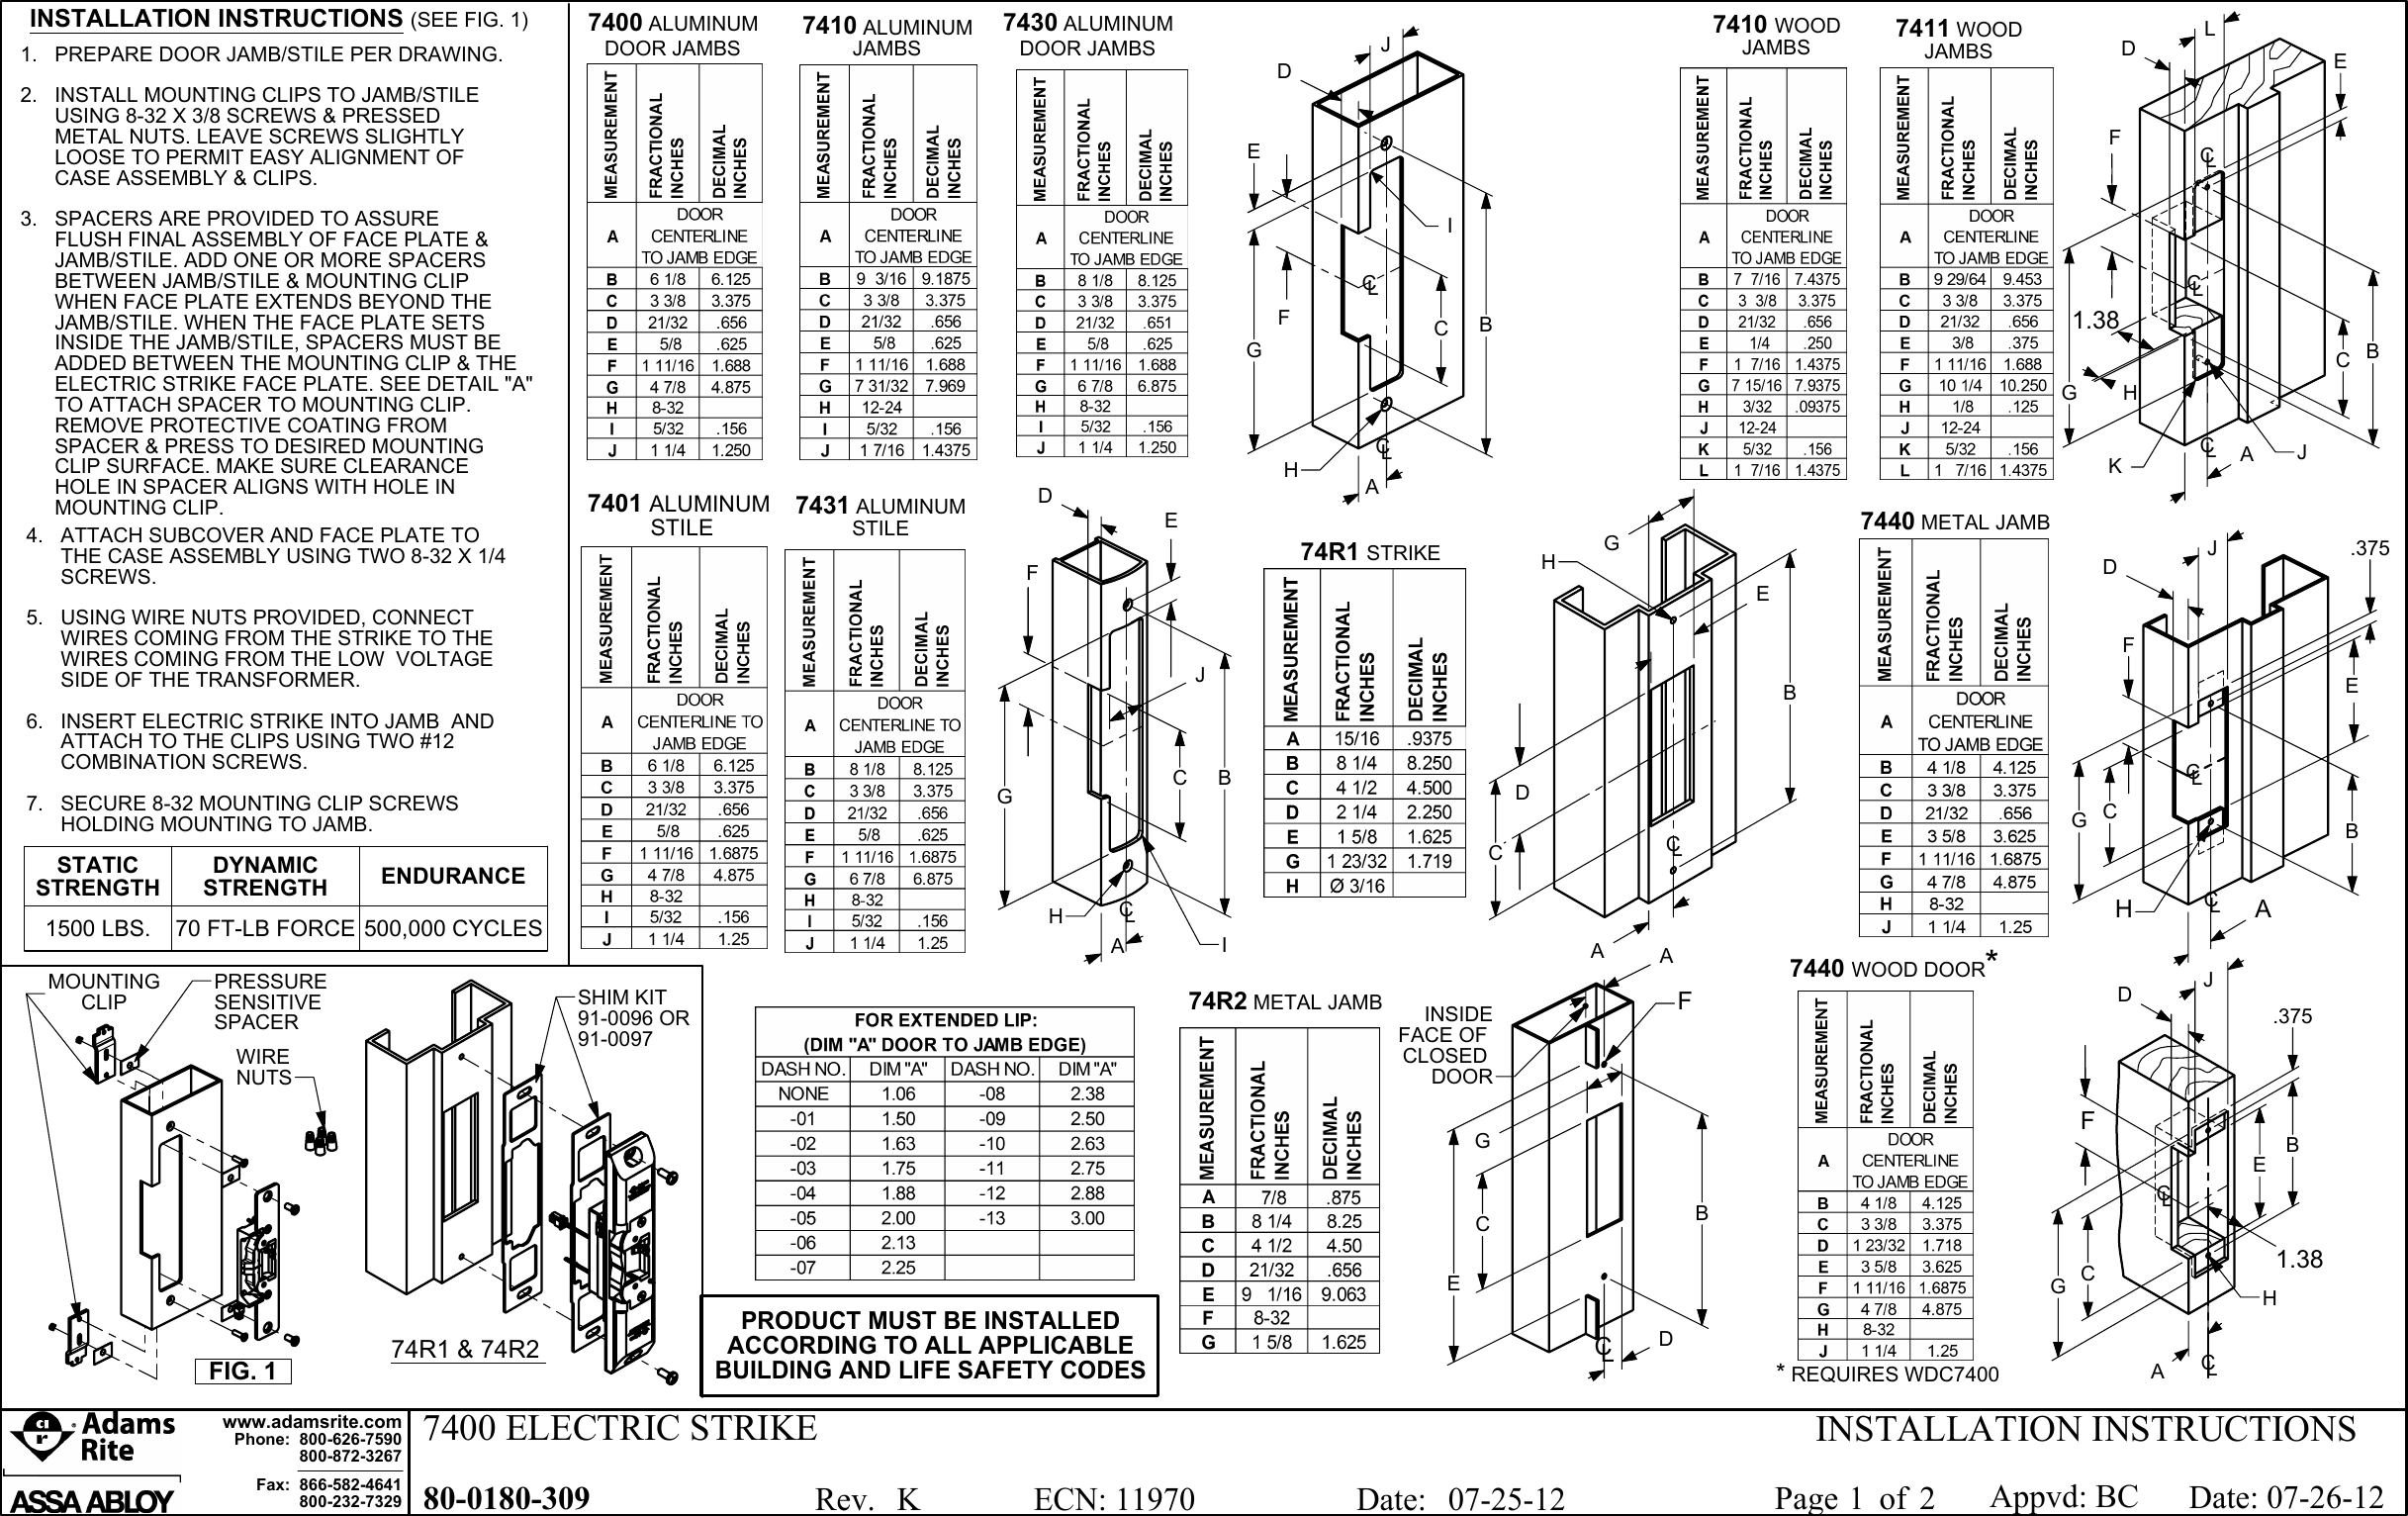 Page 1 of 2 - Adams Rite 80-0180-309_K 7400 Series Electric Strikes Installation Instructions ES7400 80-0180-309 K